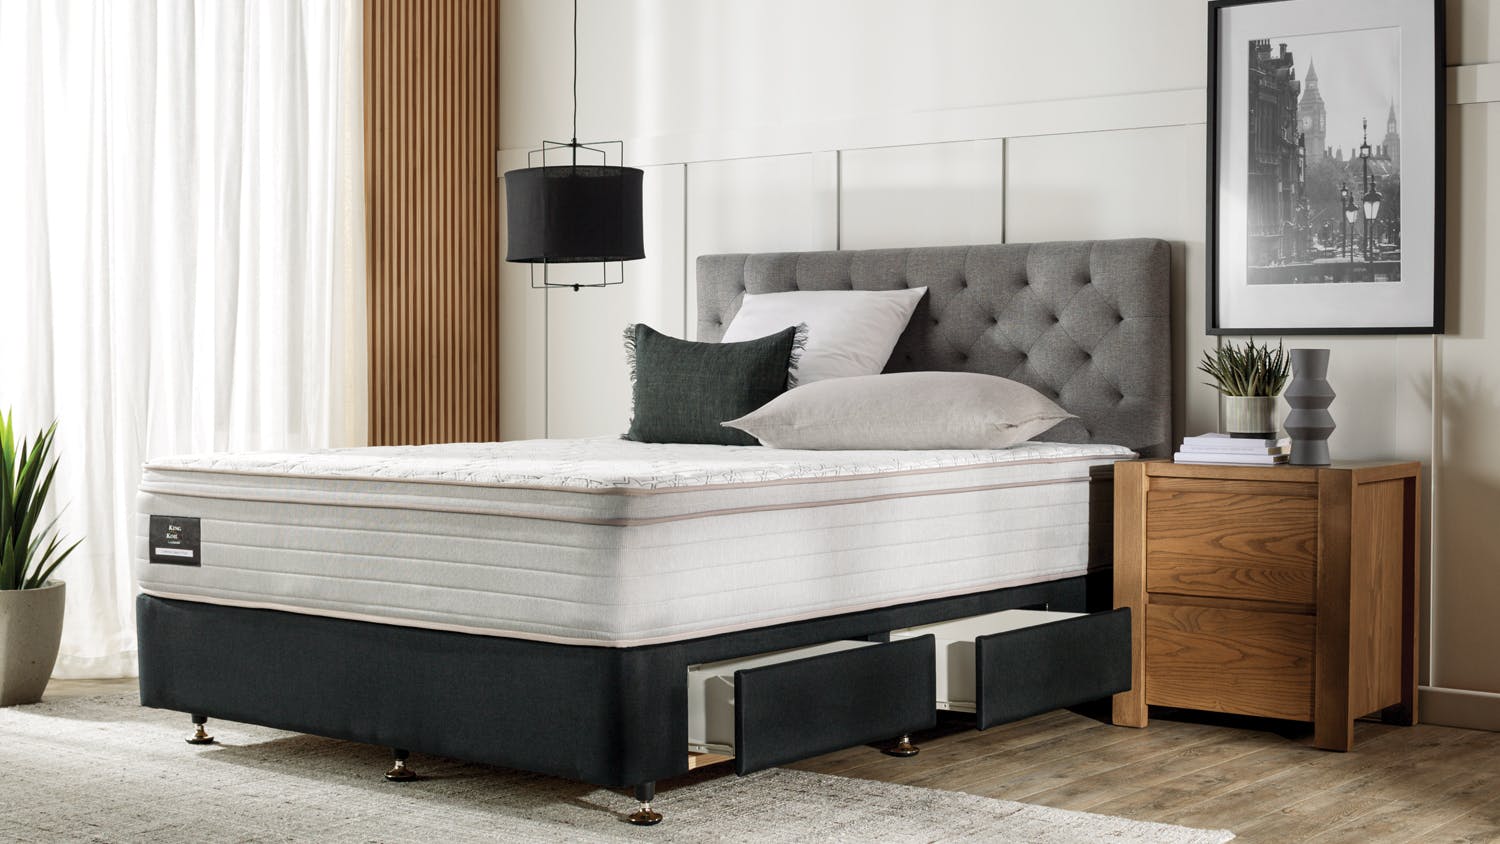 Conforma Classic II Soft Queen Mattress with Designer Black Drawer Bed Base